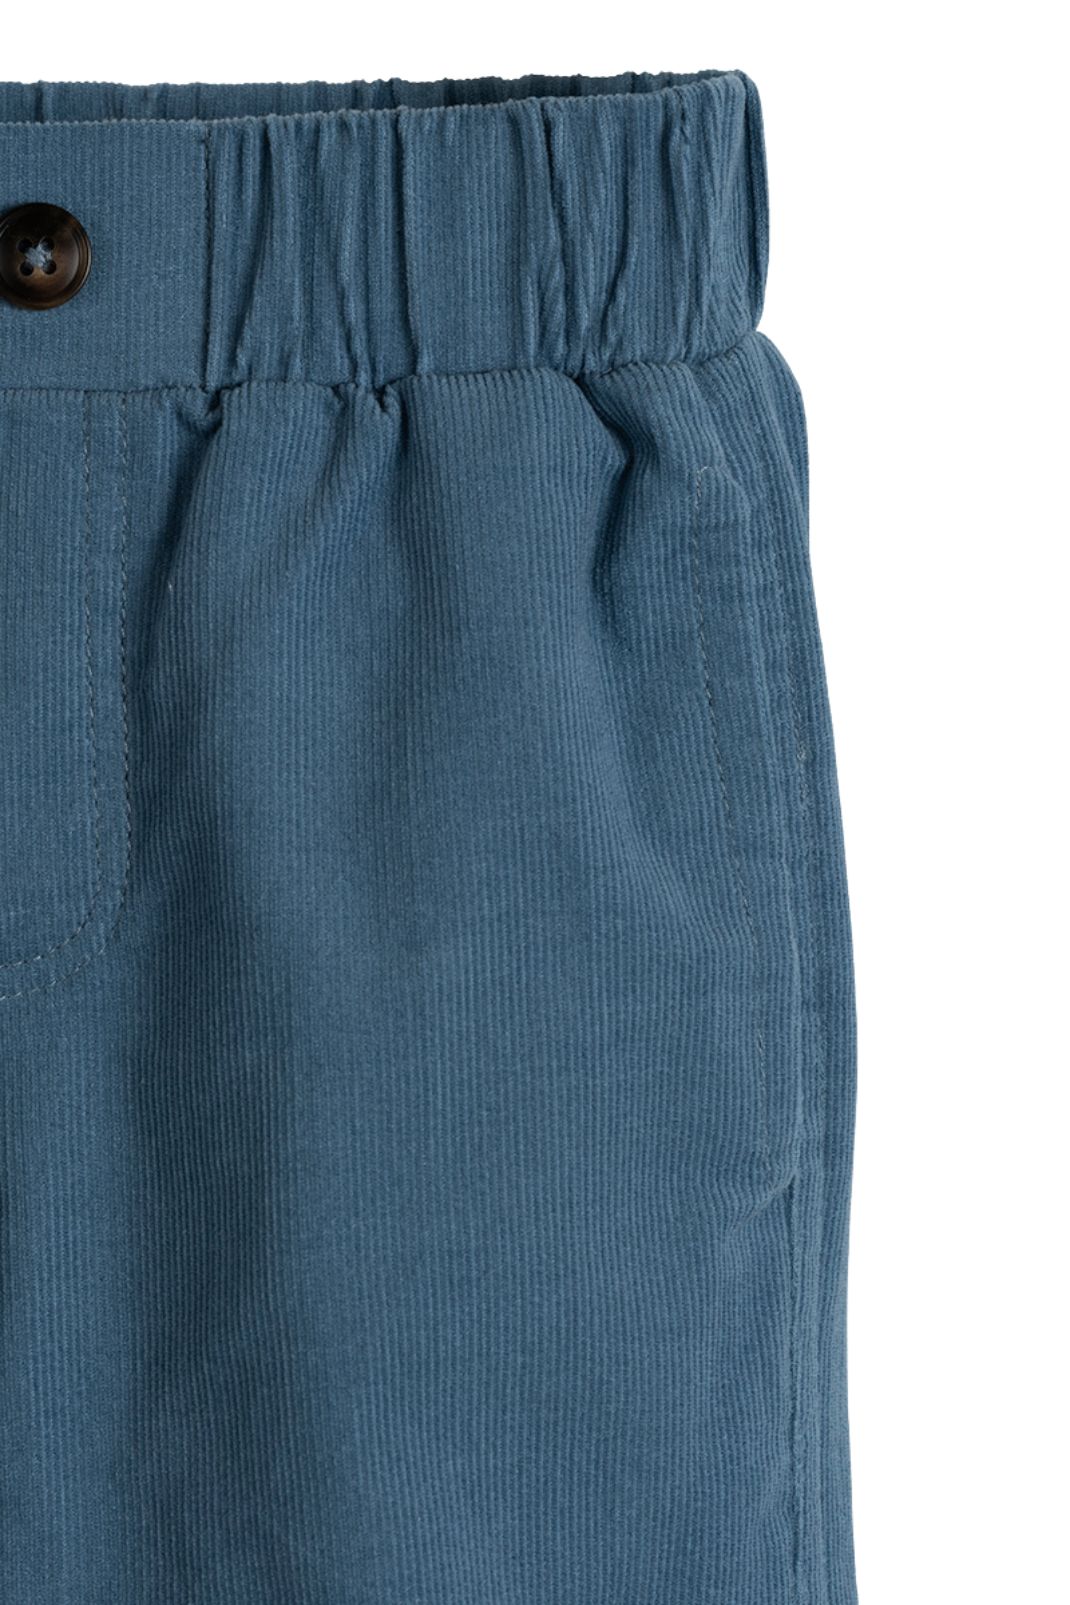 Detailed product shot of the Devon Pant in Medium Blue